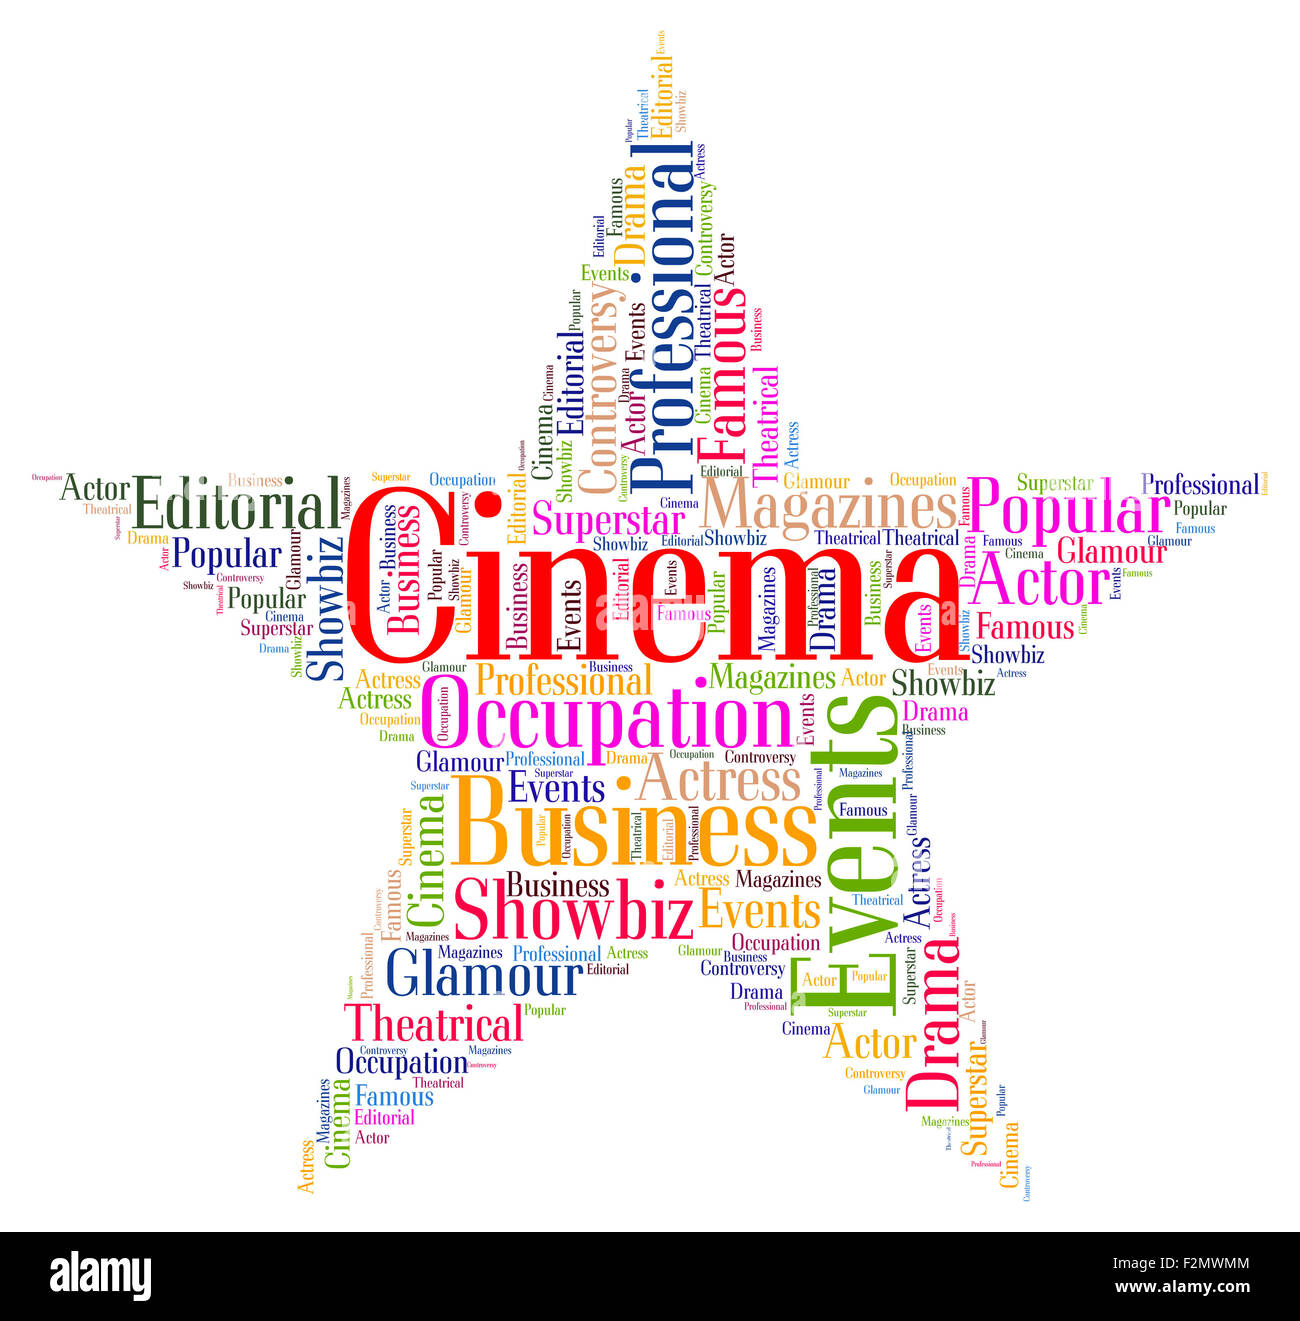 Cinema Star Showing Watch Movies And Filmography Stock Photo